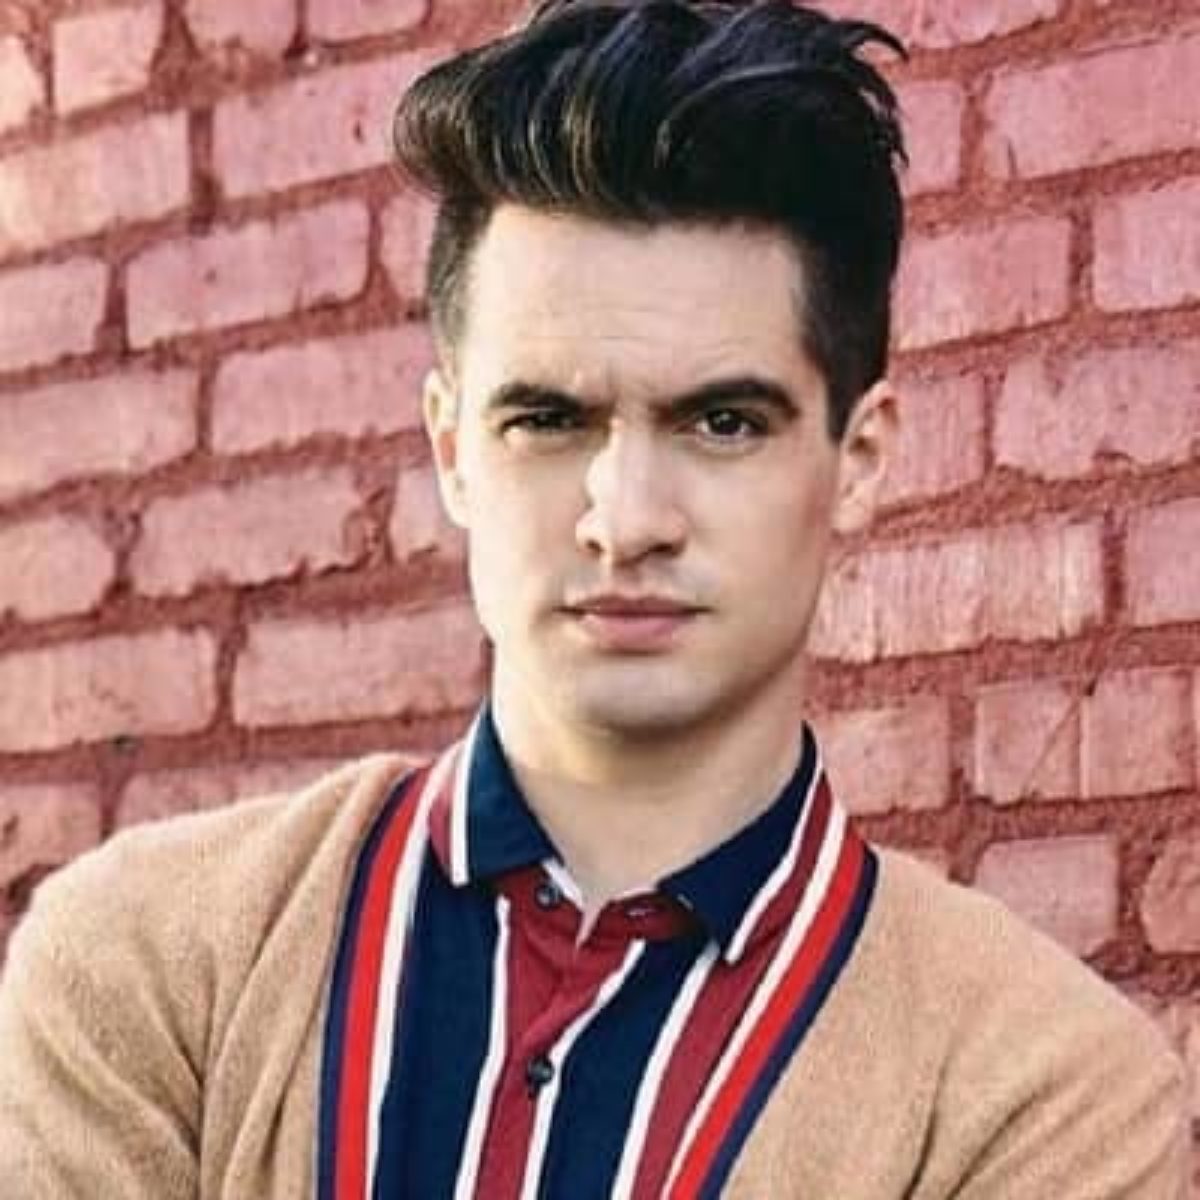 Pin by Silver Morningstar on P!atd | Brendon urie, Panic! at the disco, Emo  music